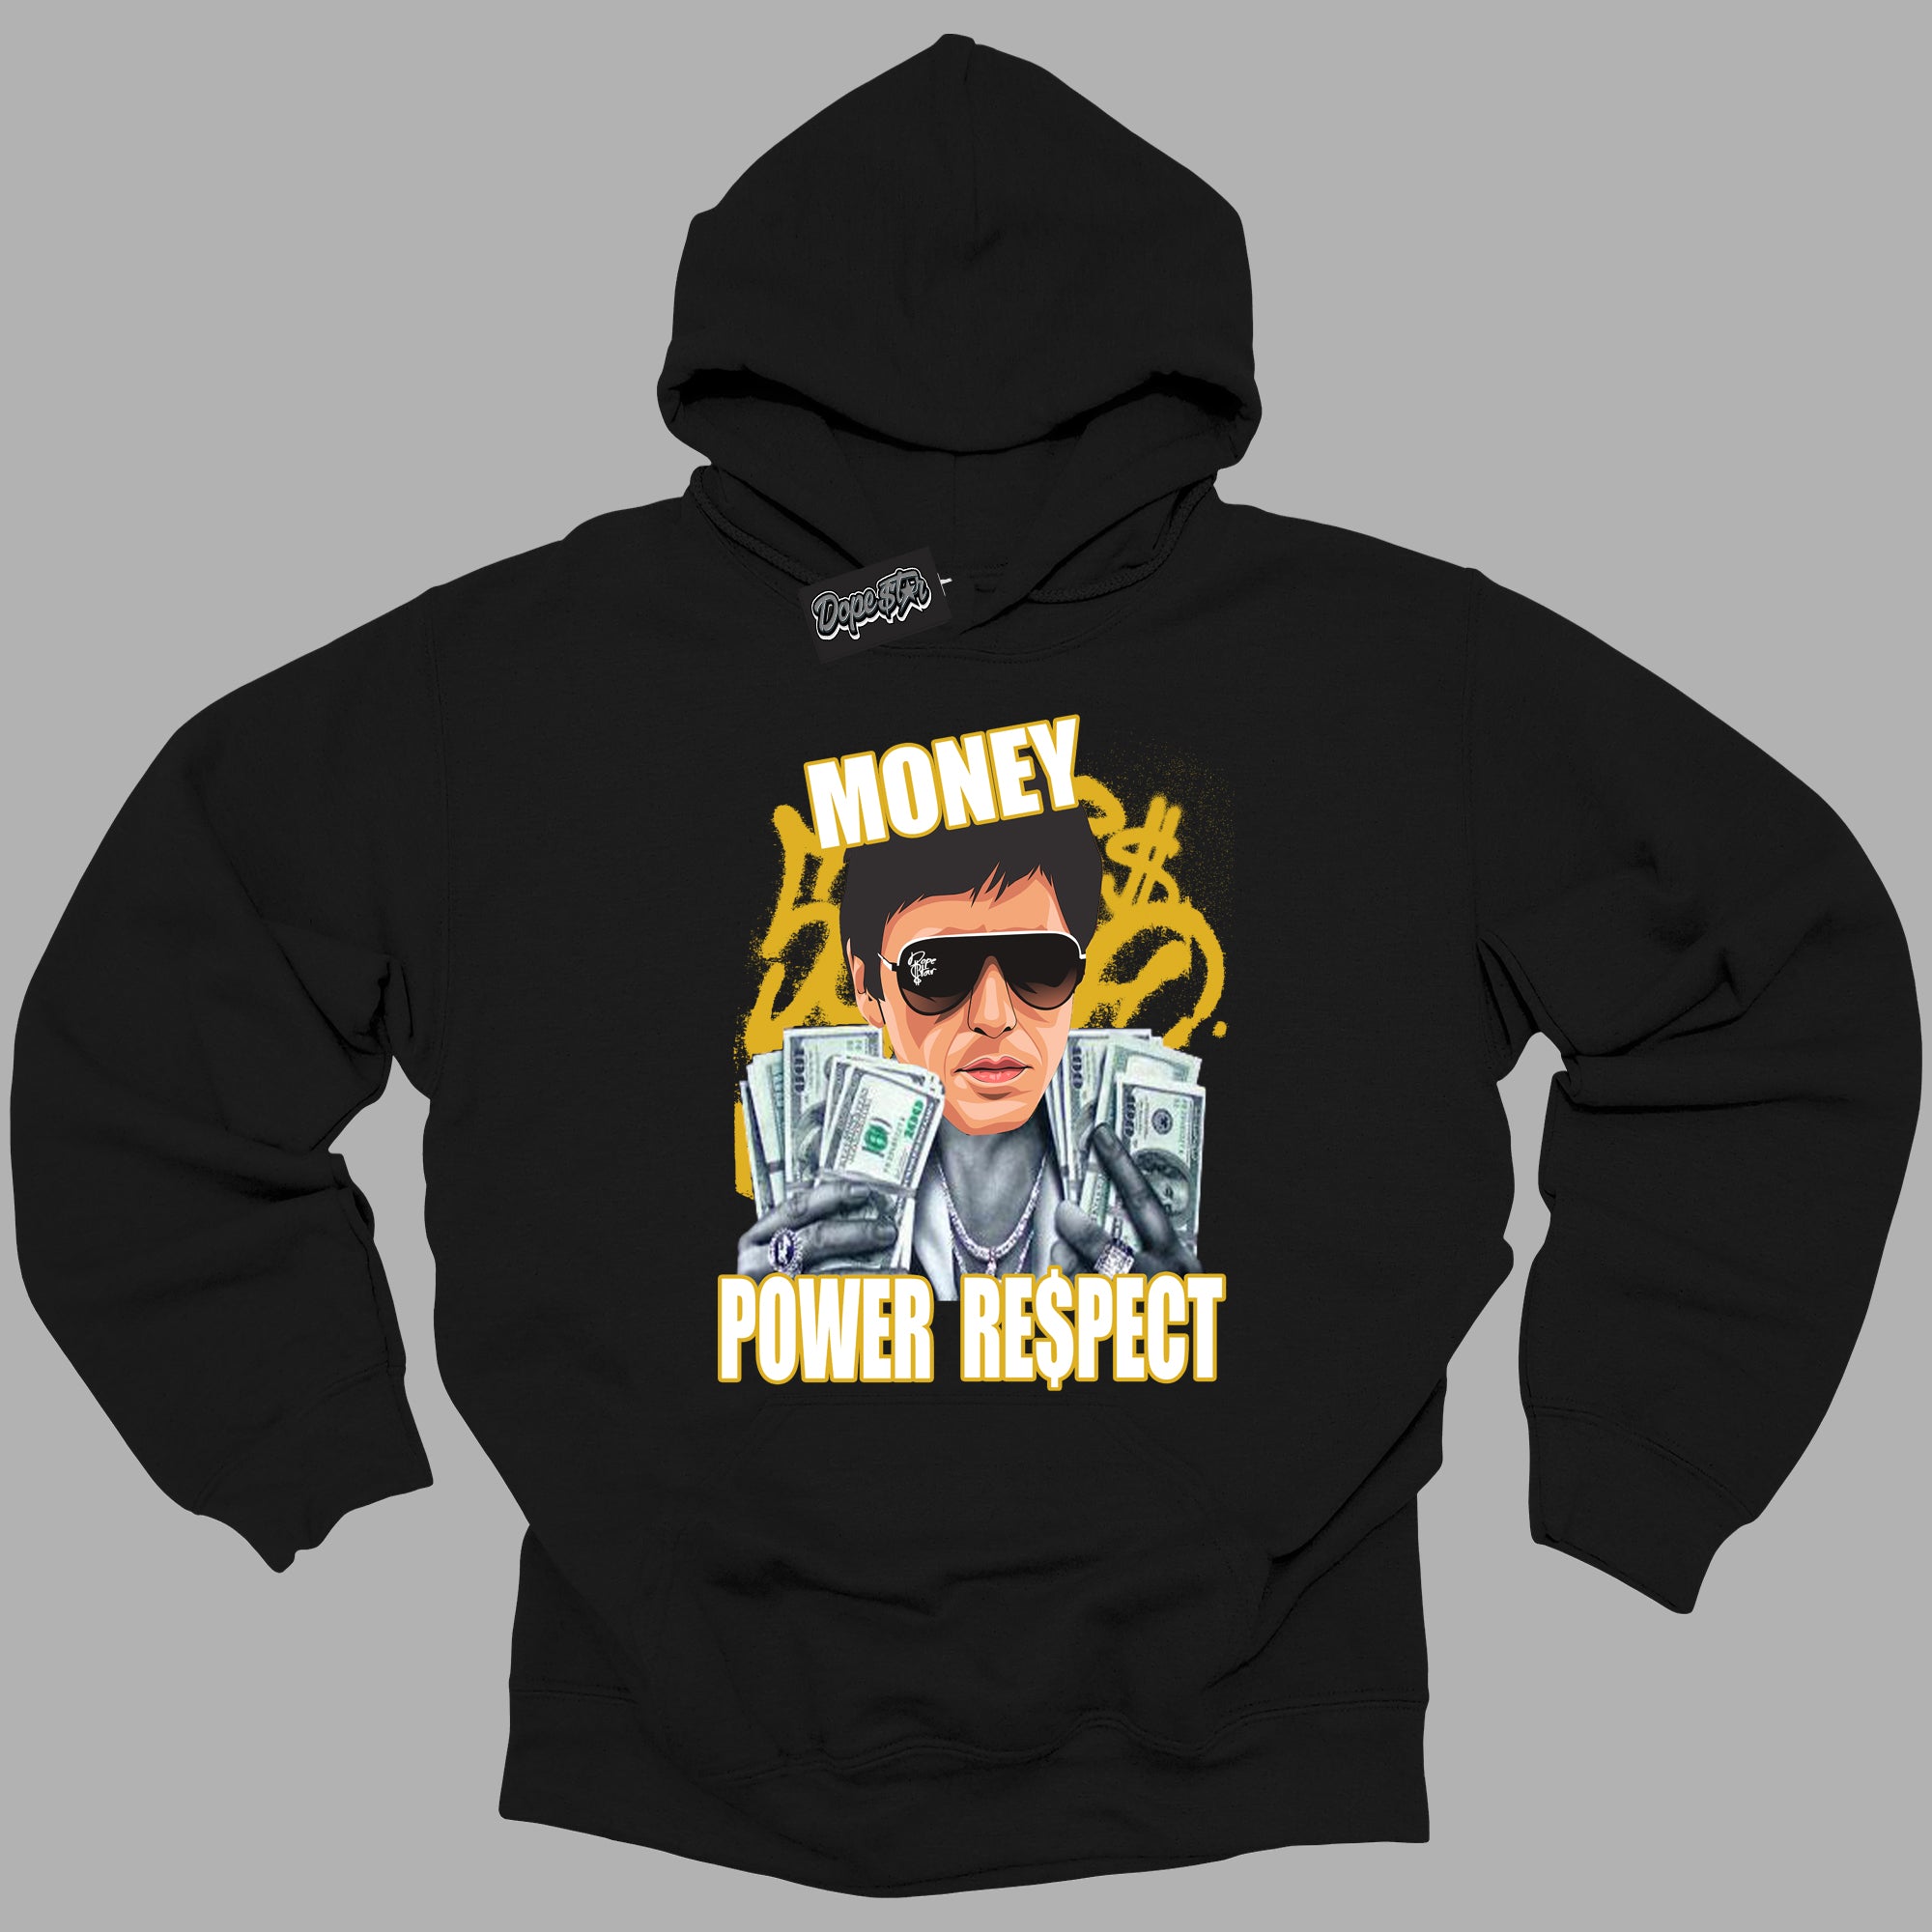 Cool Black Hoodie with “ Tony Montana ”  design that Perfectly Matches Yellow Ochre 6s Sneakers.